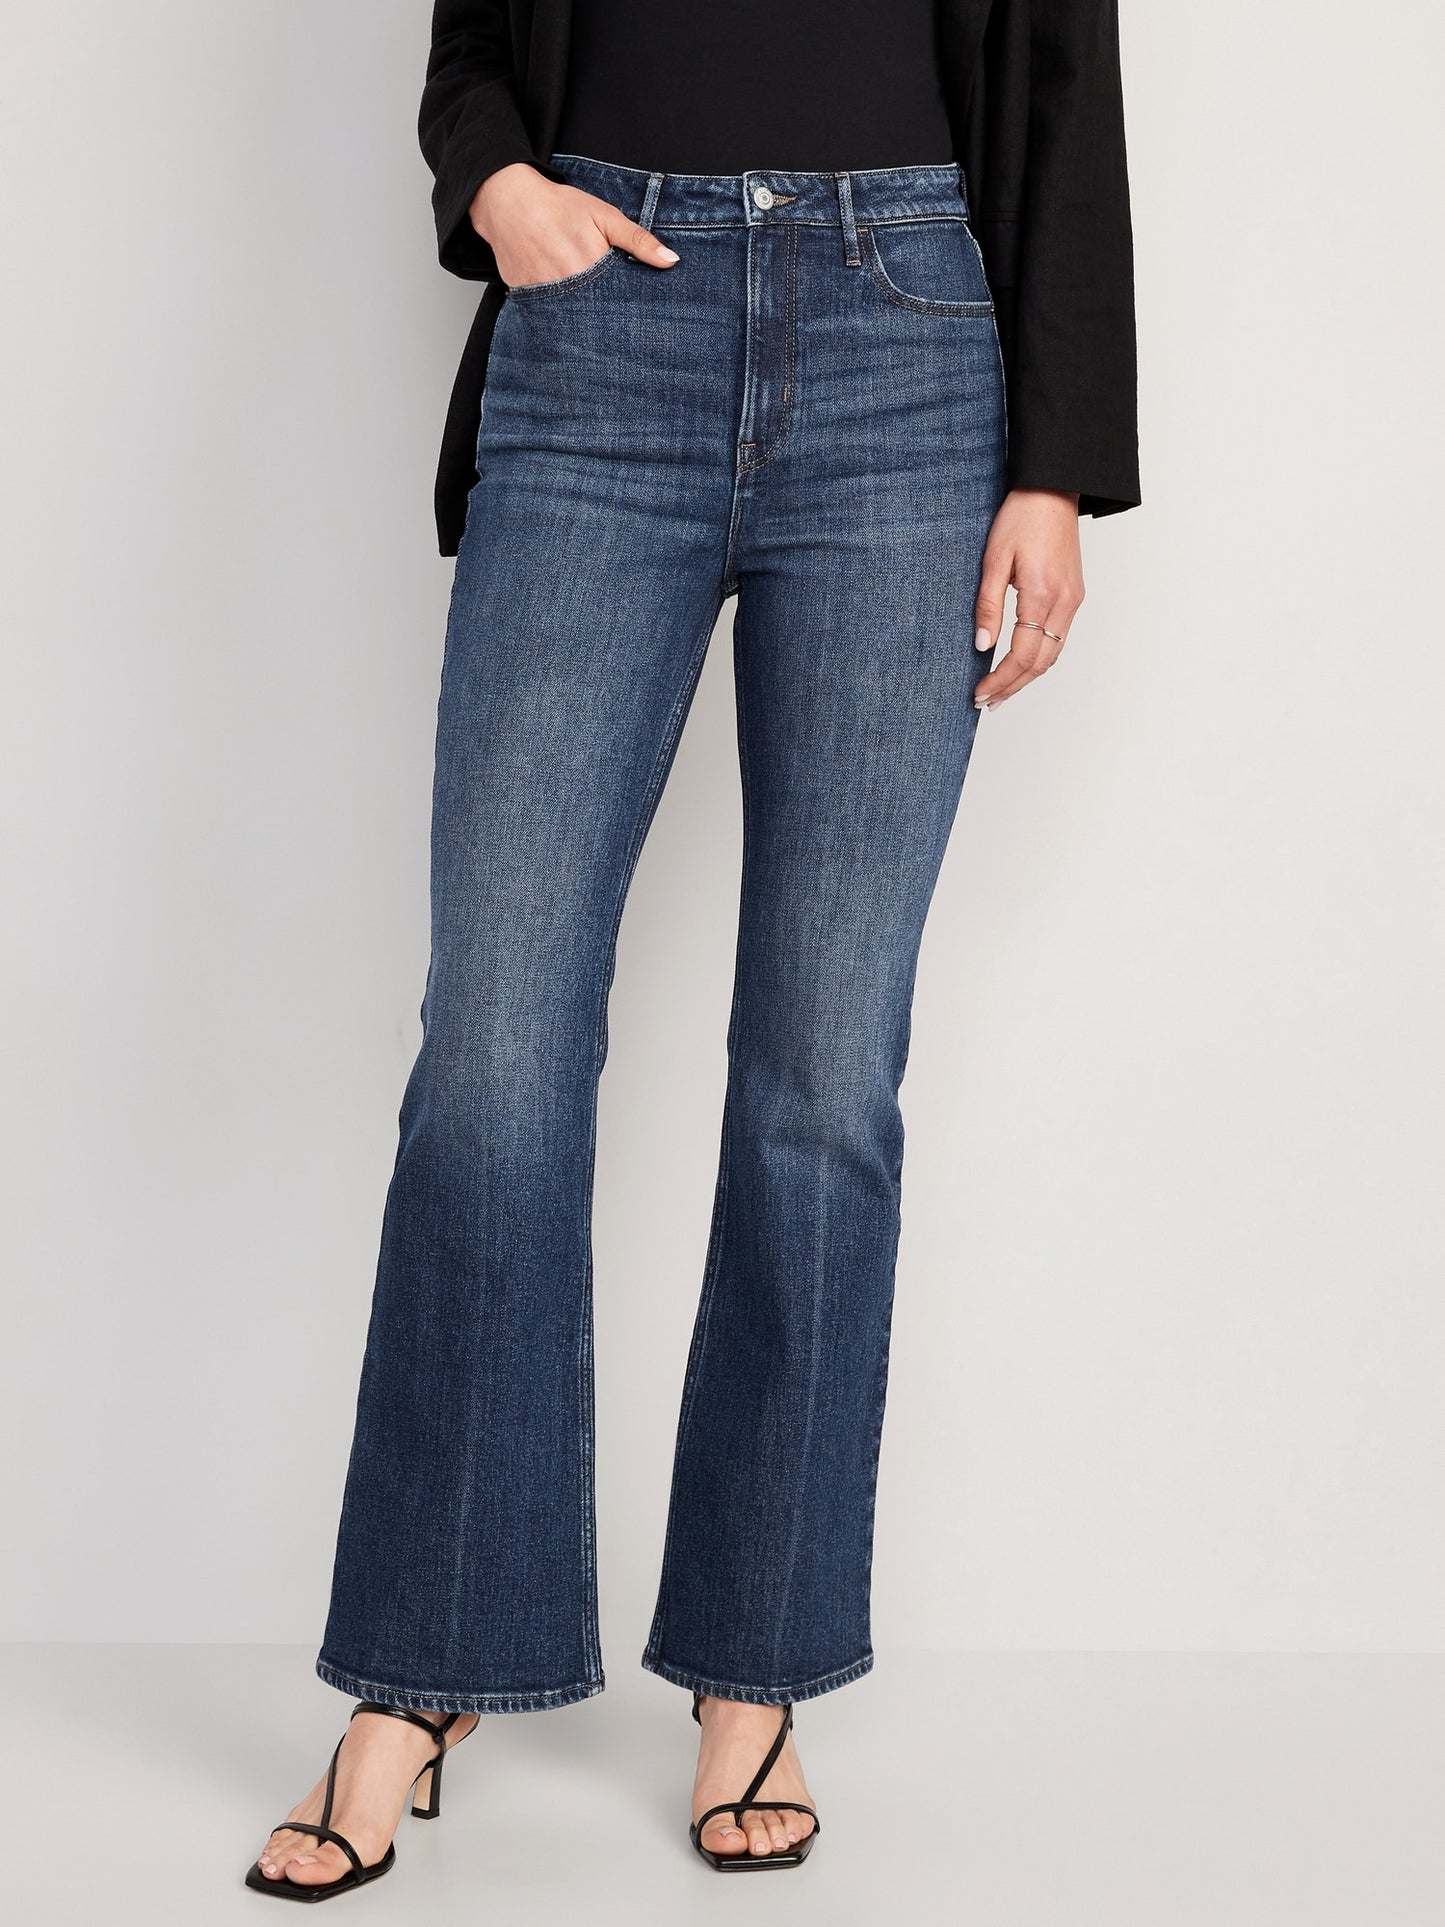 Higher High-Waisted Flare Jeans for Women